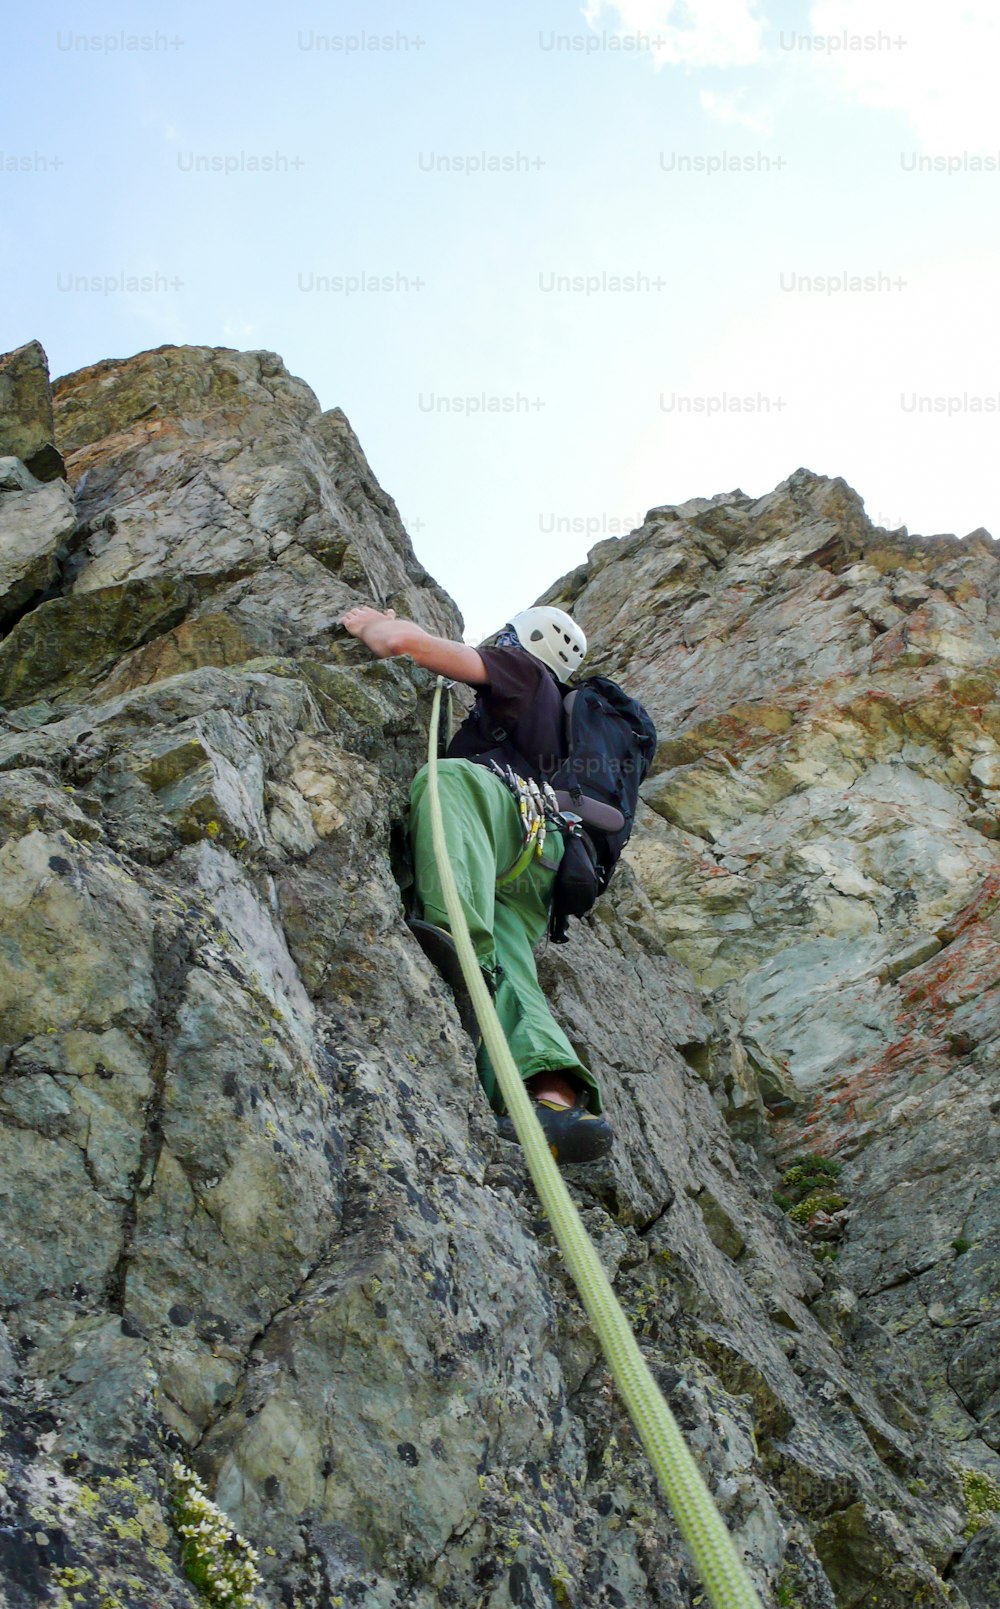 A male rock climber on a steep climbing route in the Alps